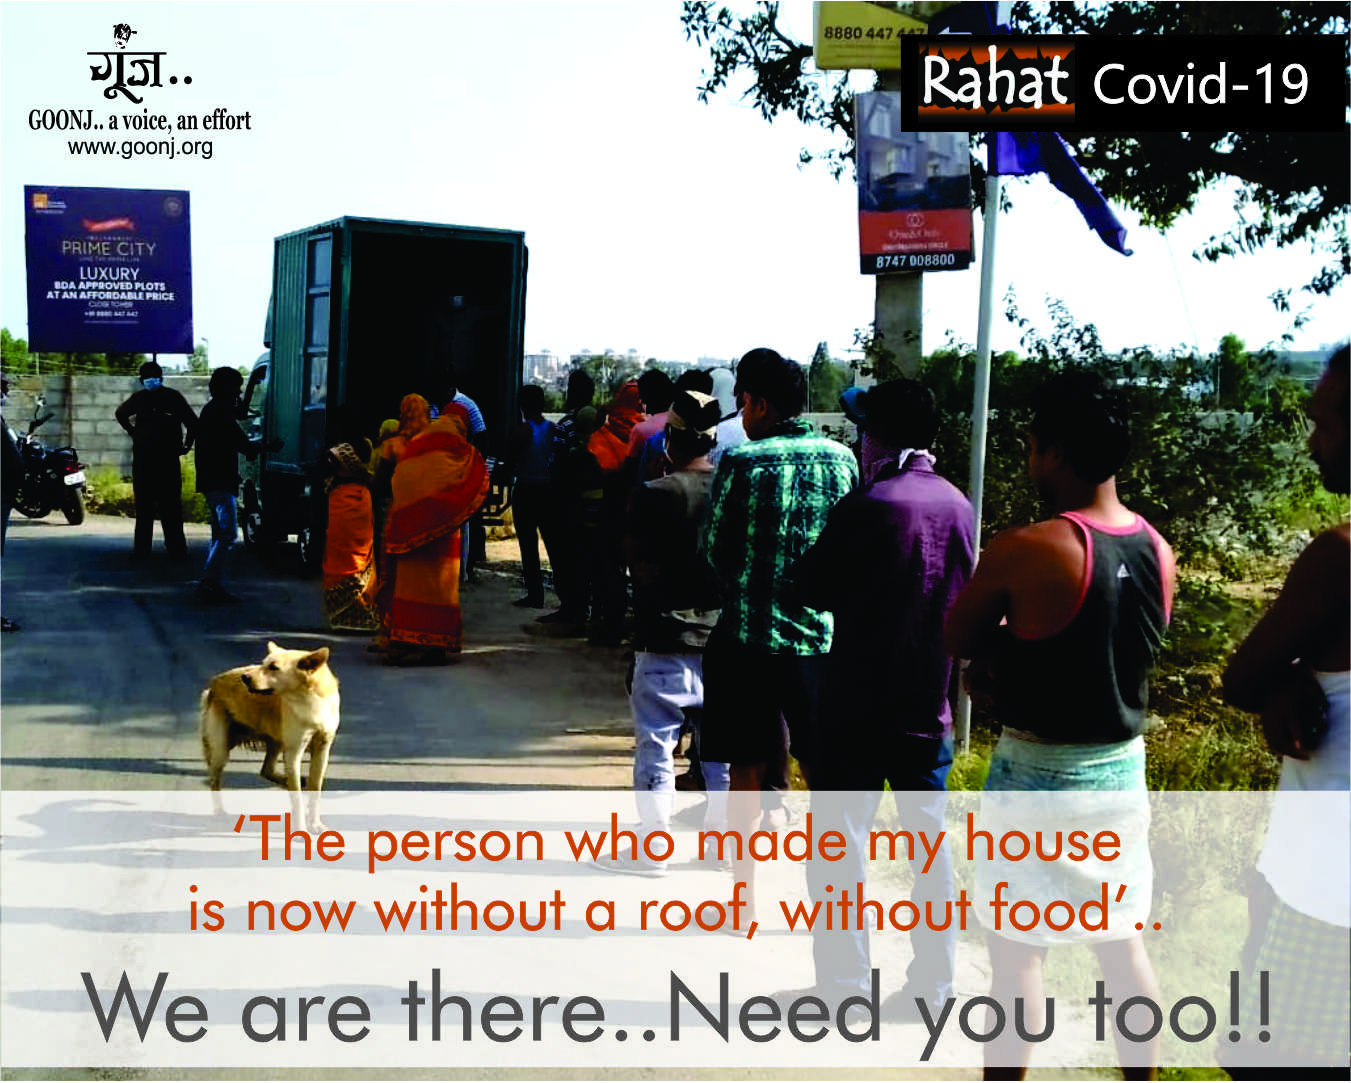 We are there.. Need you too !! #RahatCOVID19